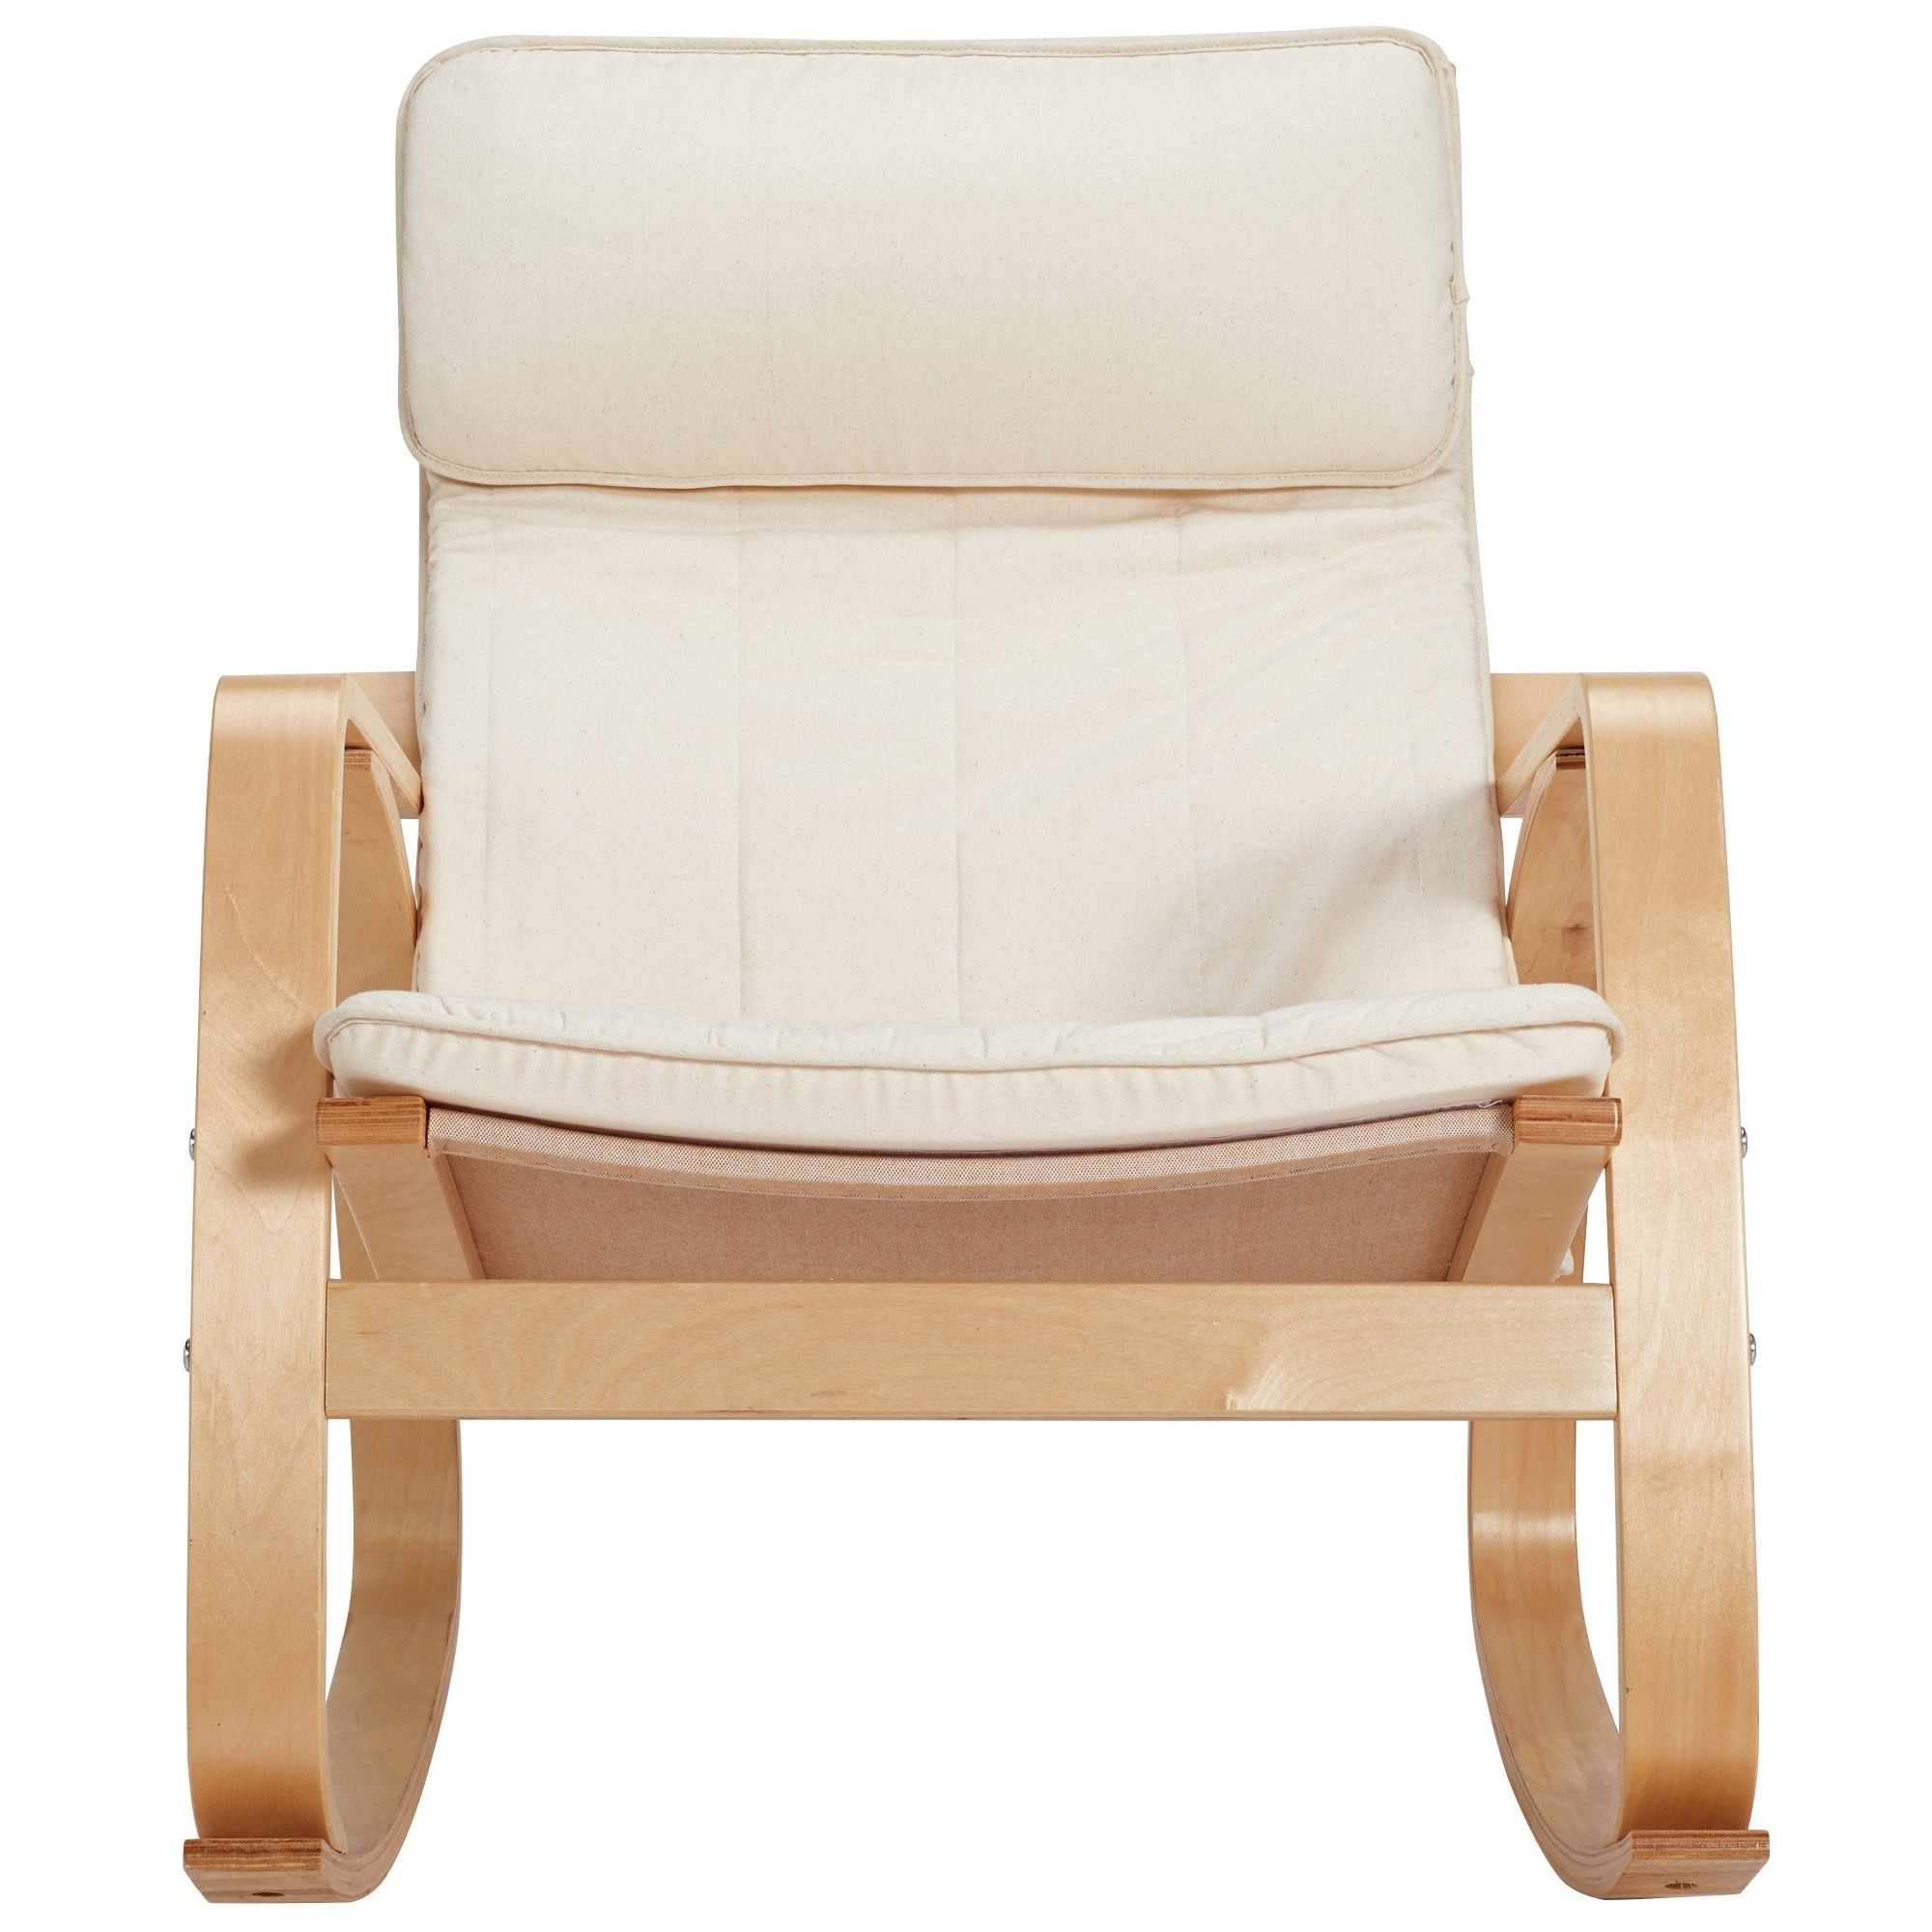 Argos Home Fabric Rocking Chair - Natural - image 1